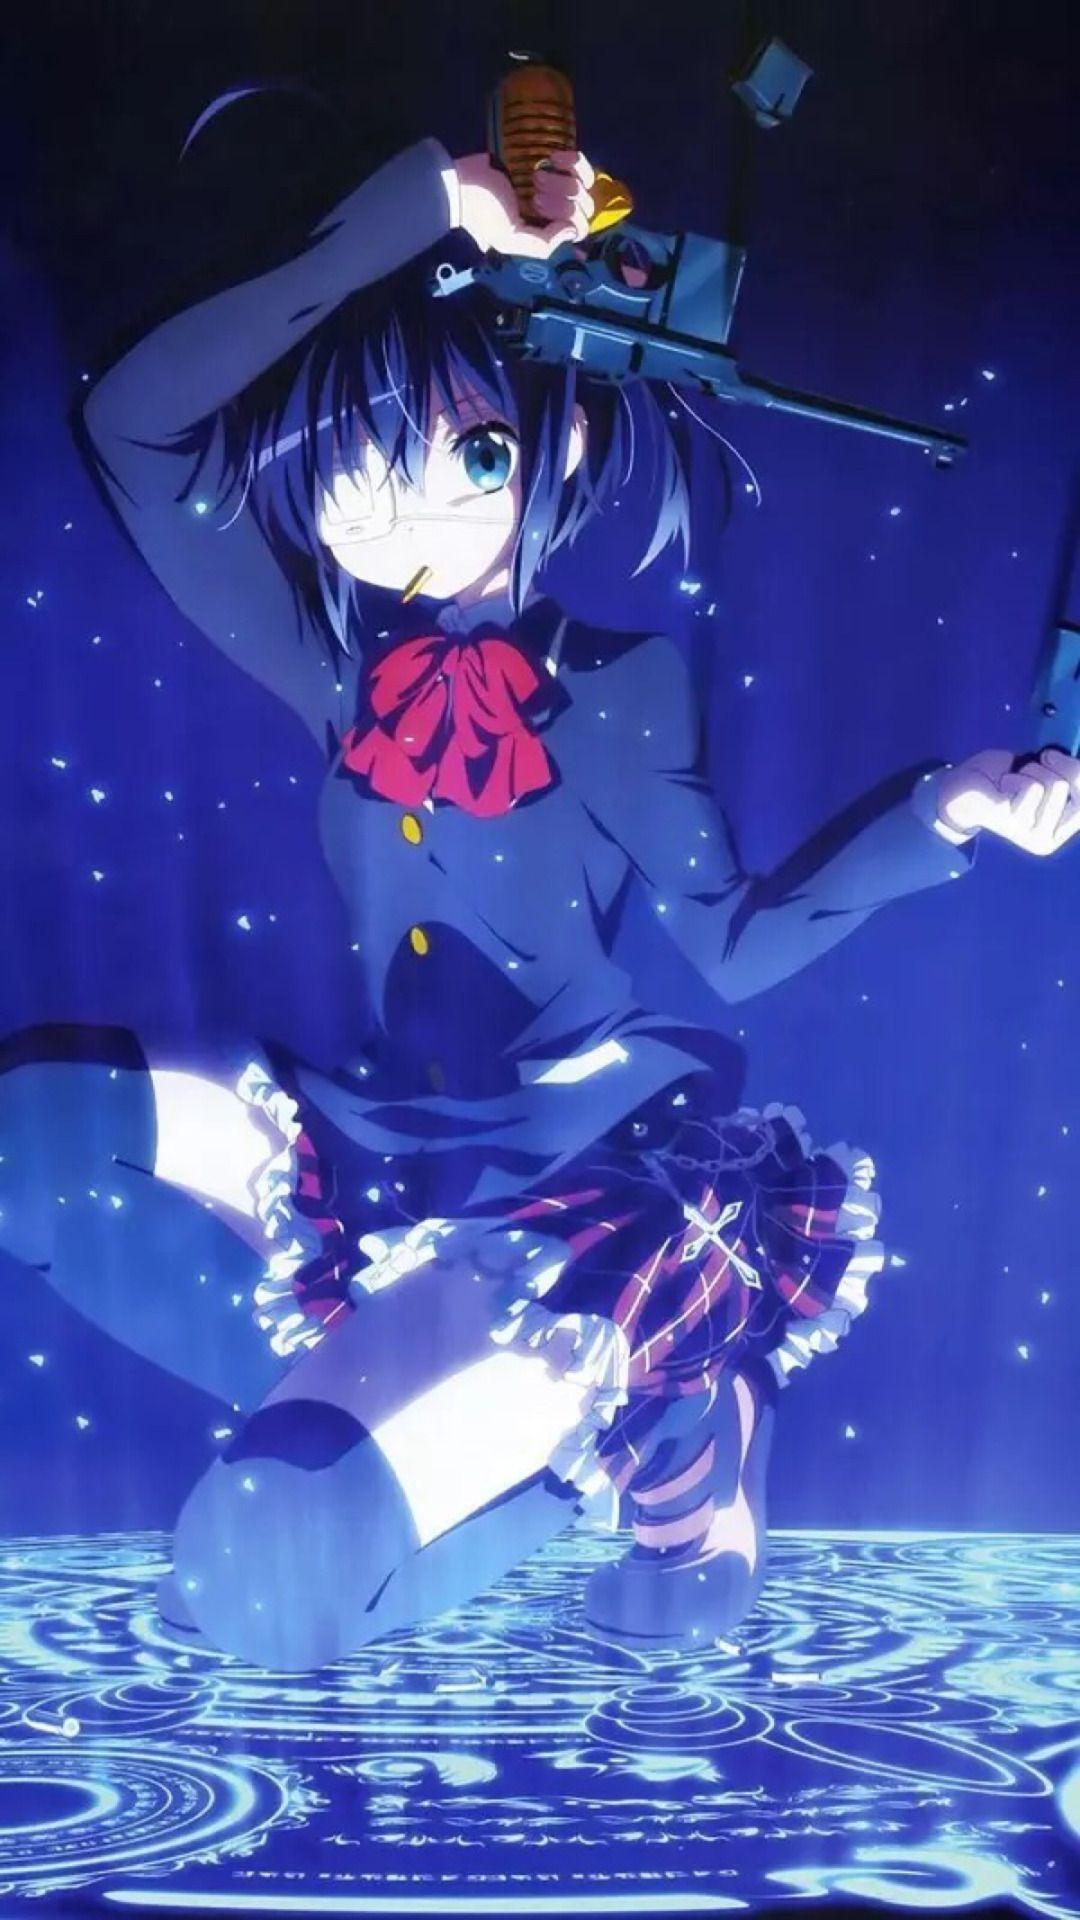 Anime: Love, Chunibyo & Other Delusions